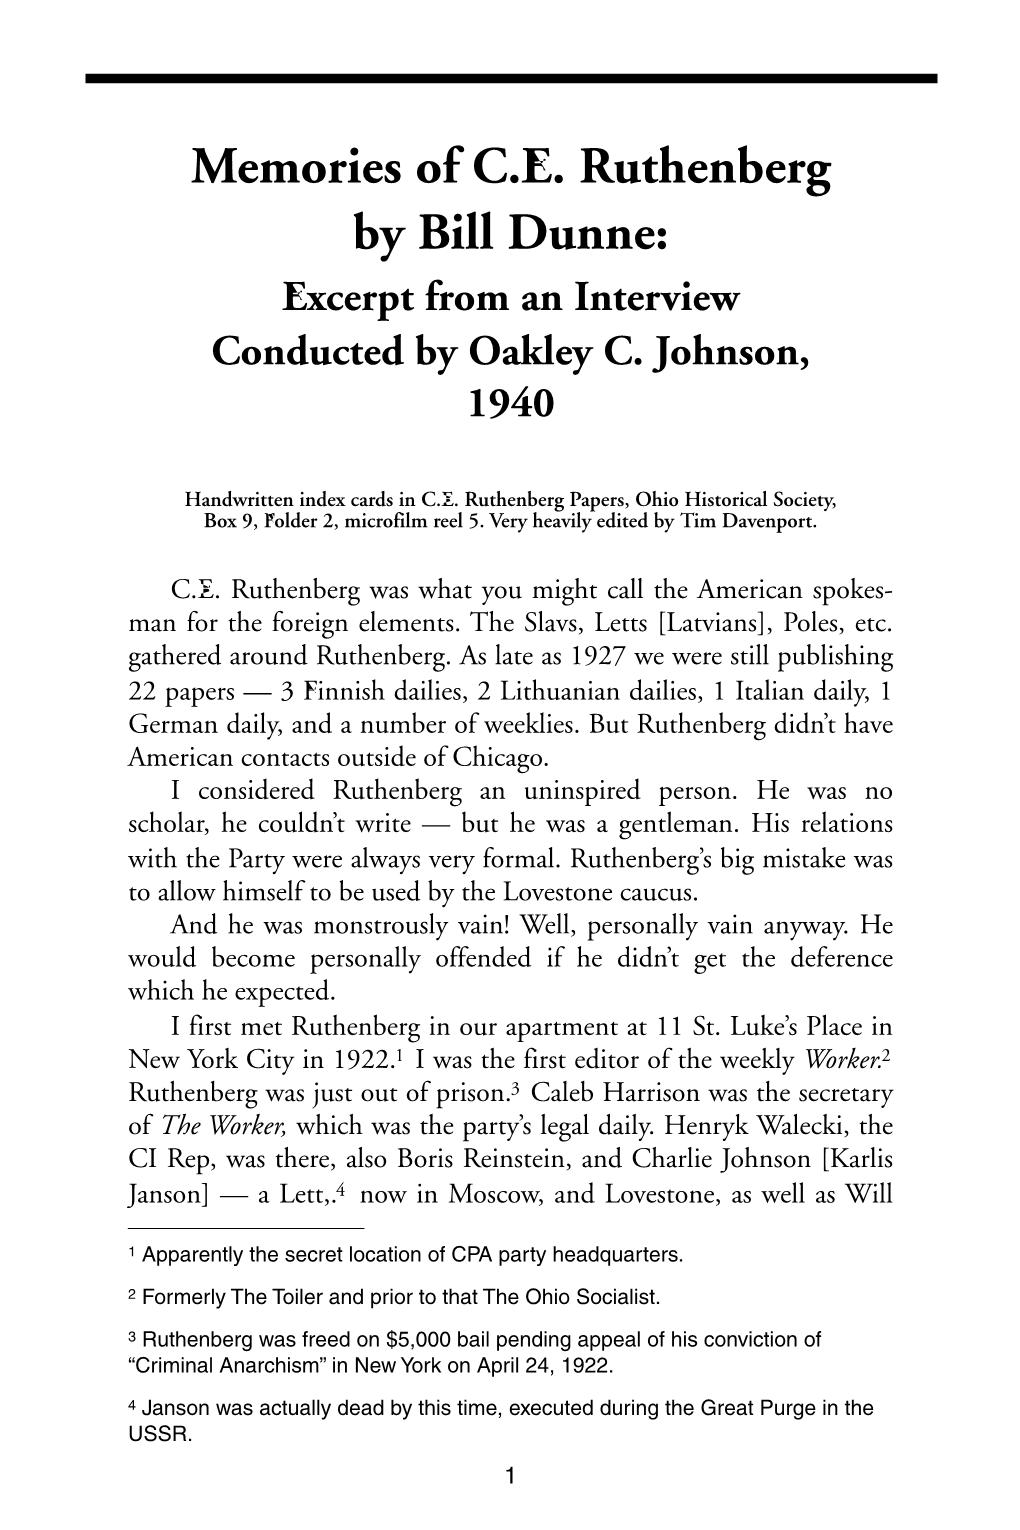 Memories of C.E. Ruthenberg by Bill Dunne: Excerpt from an Interview Conducted by Oakley C. Johnson, 1940